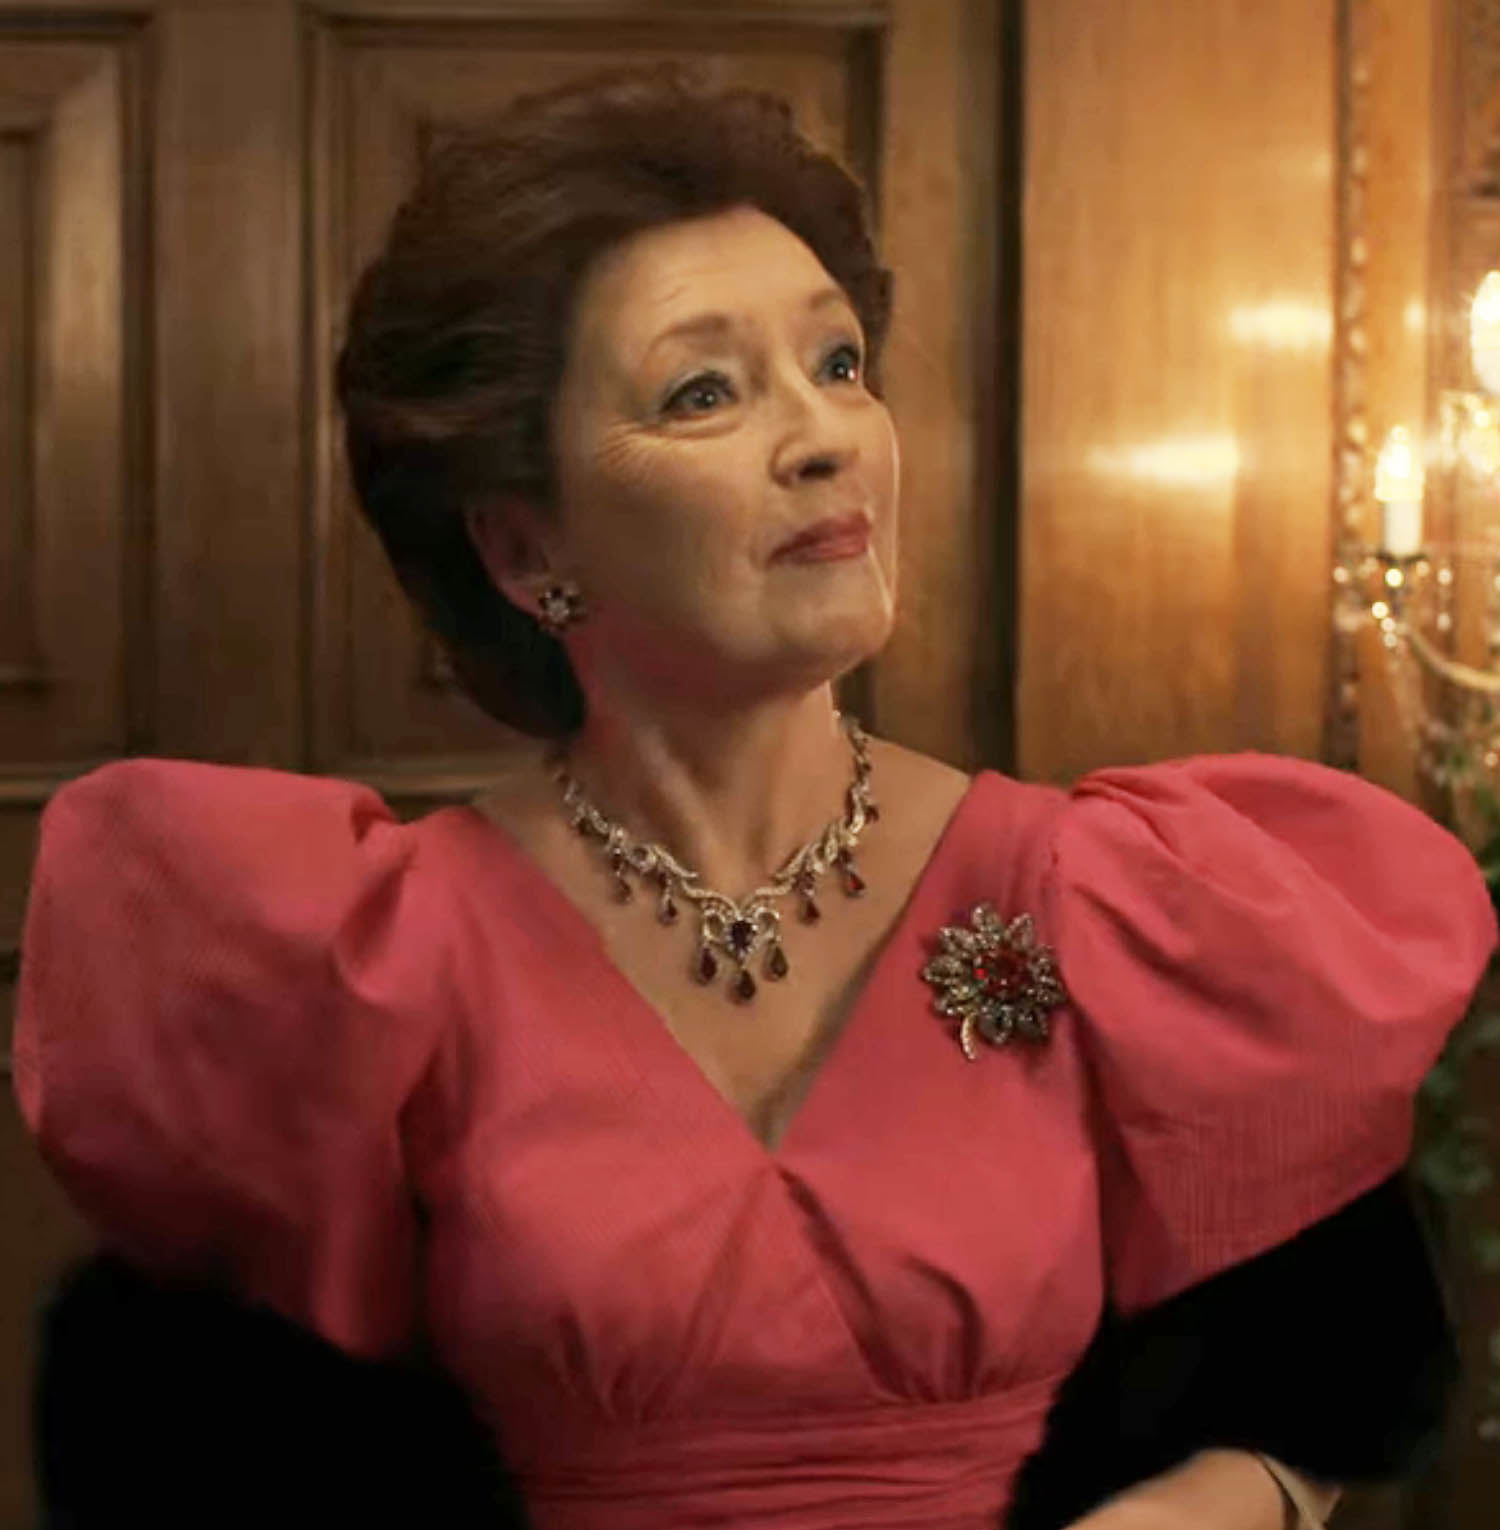 Lesley in a formal pink dress with voluminous pink shoulders and a brooch